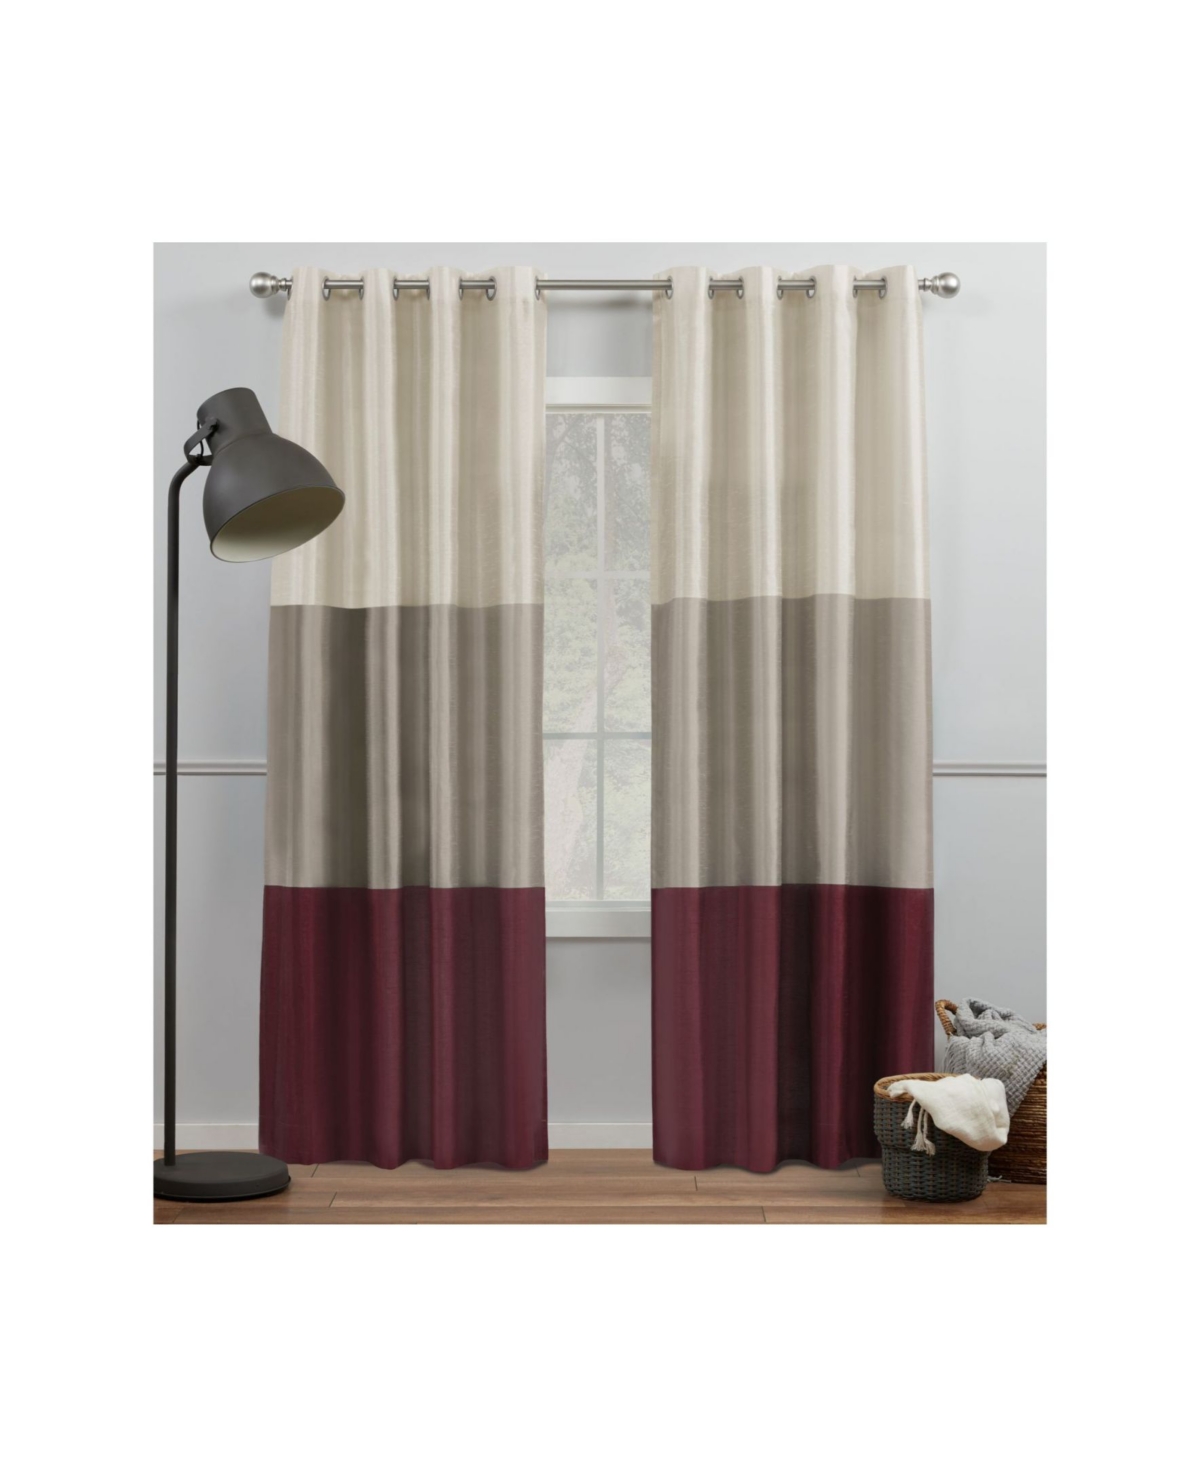 Curtains Chateau Striped Grommet Top Curtain Panel Pair, 54" x 96" - Red